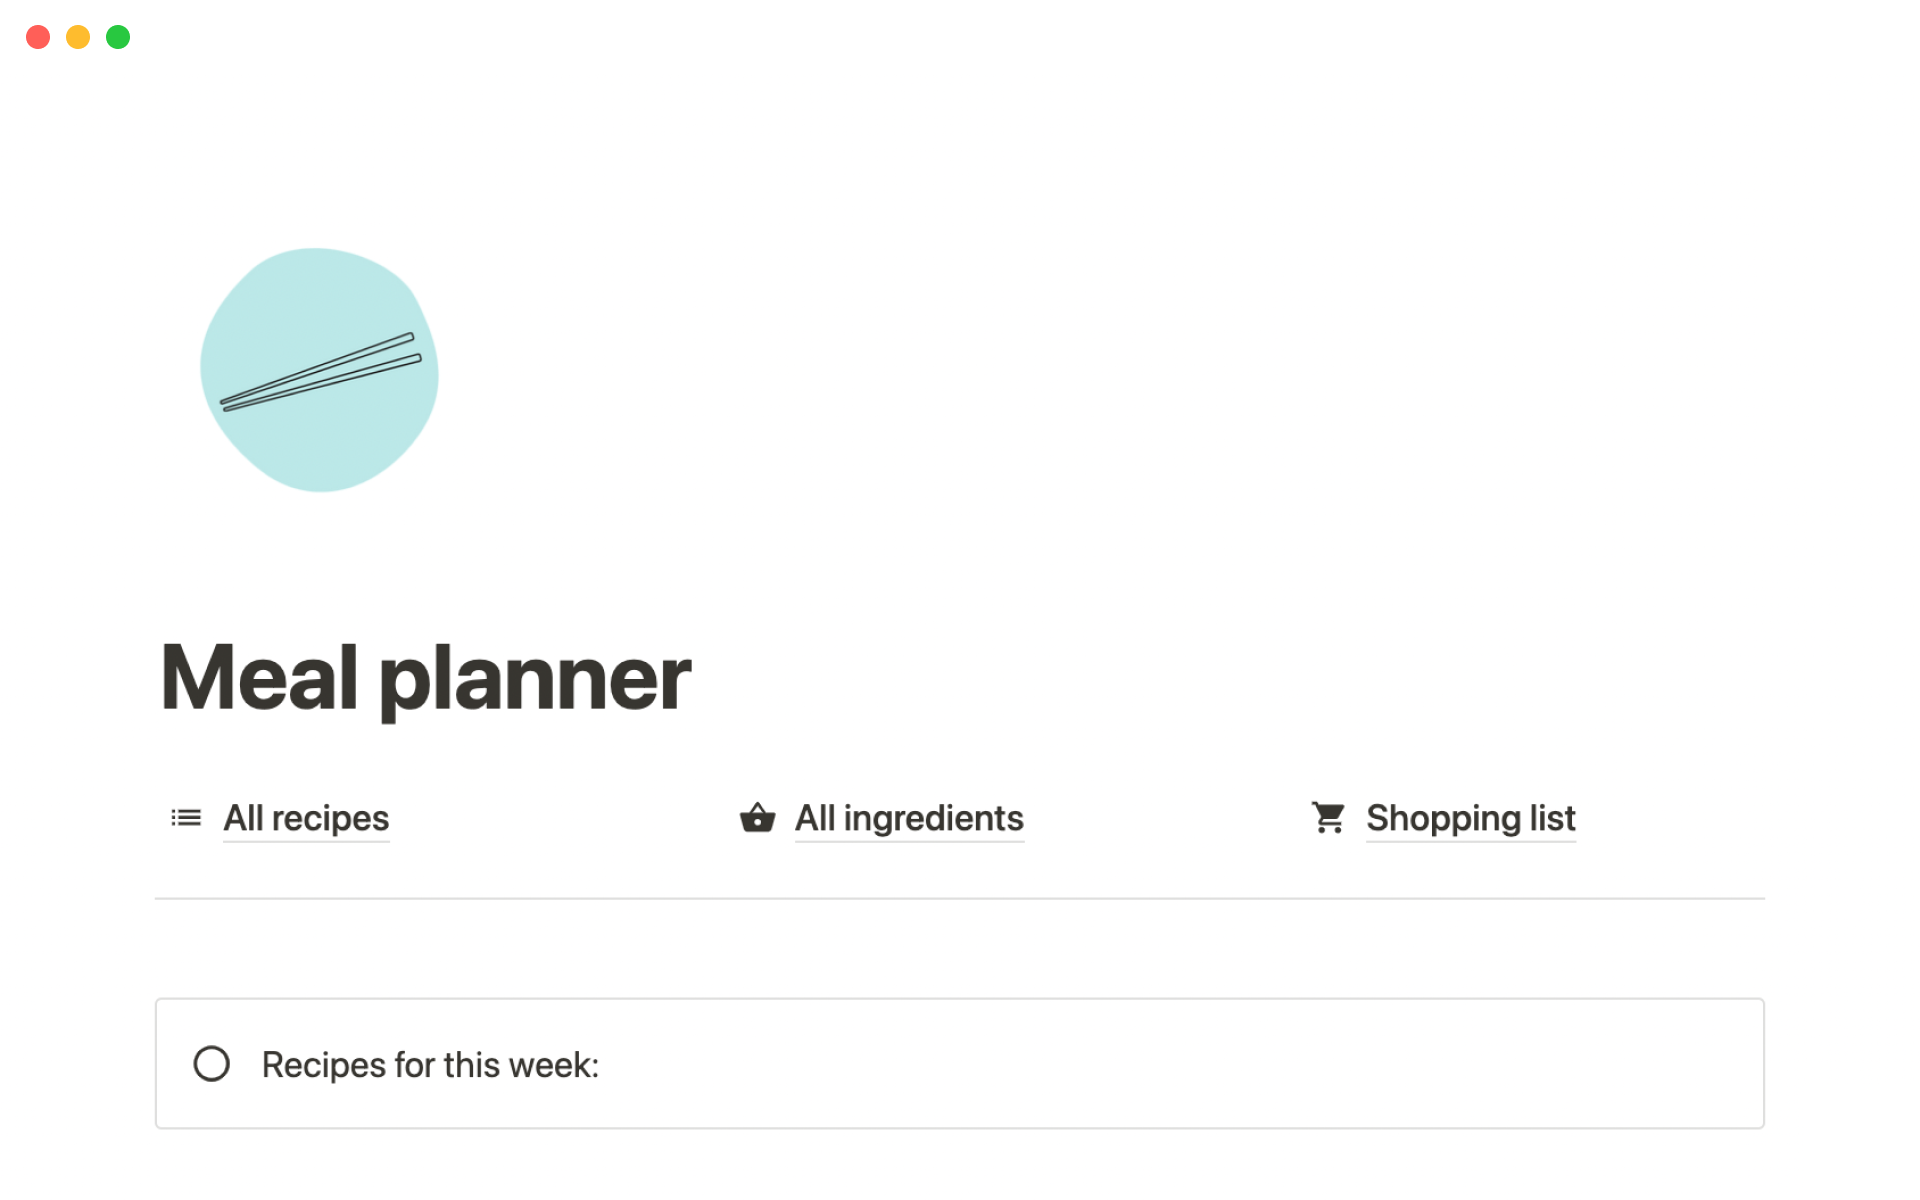 Plan meals, automate your shopping list, and track your ingredients.